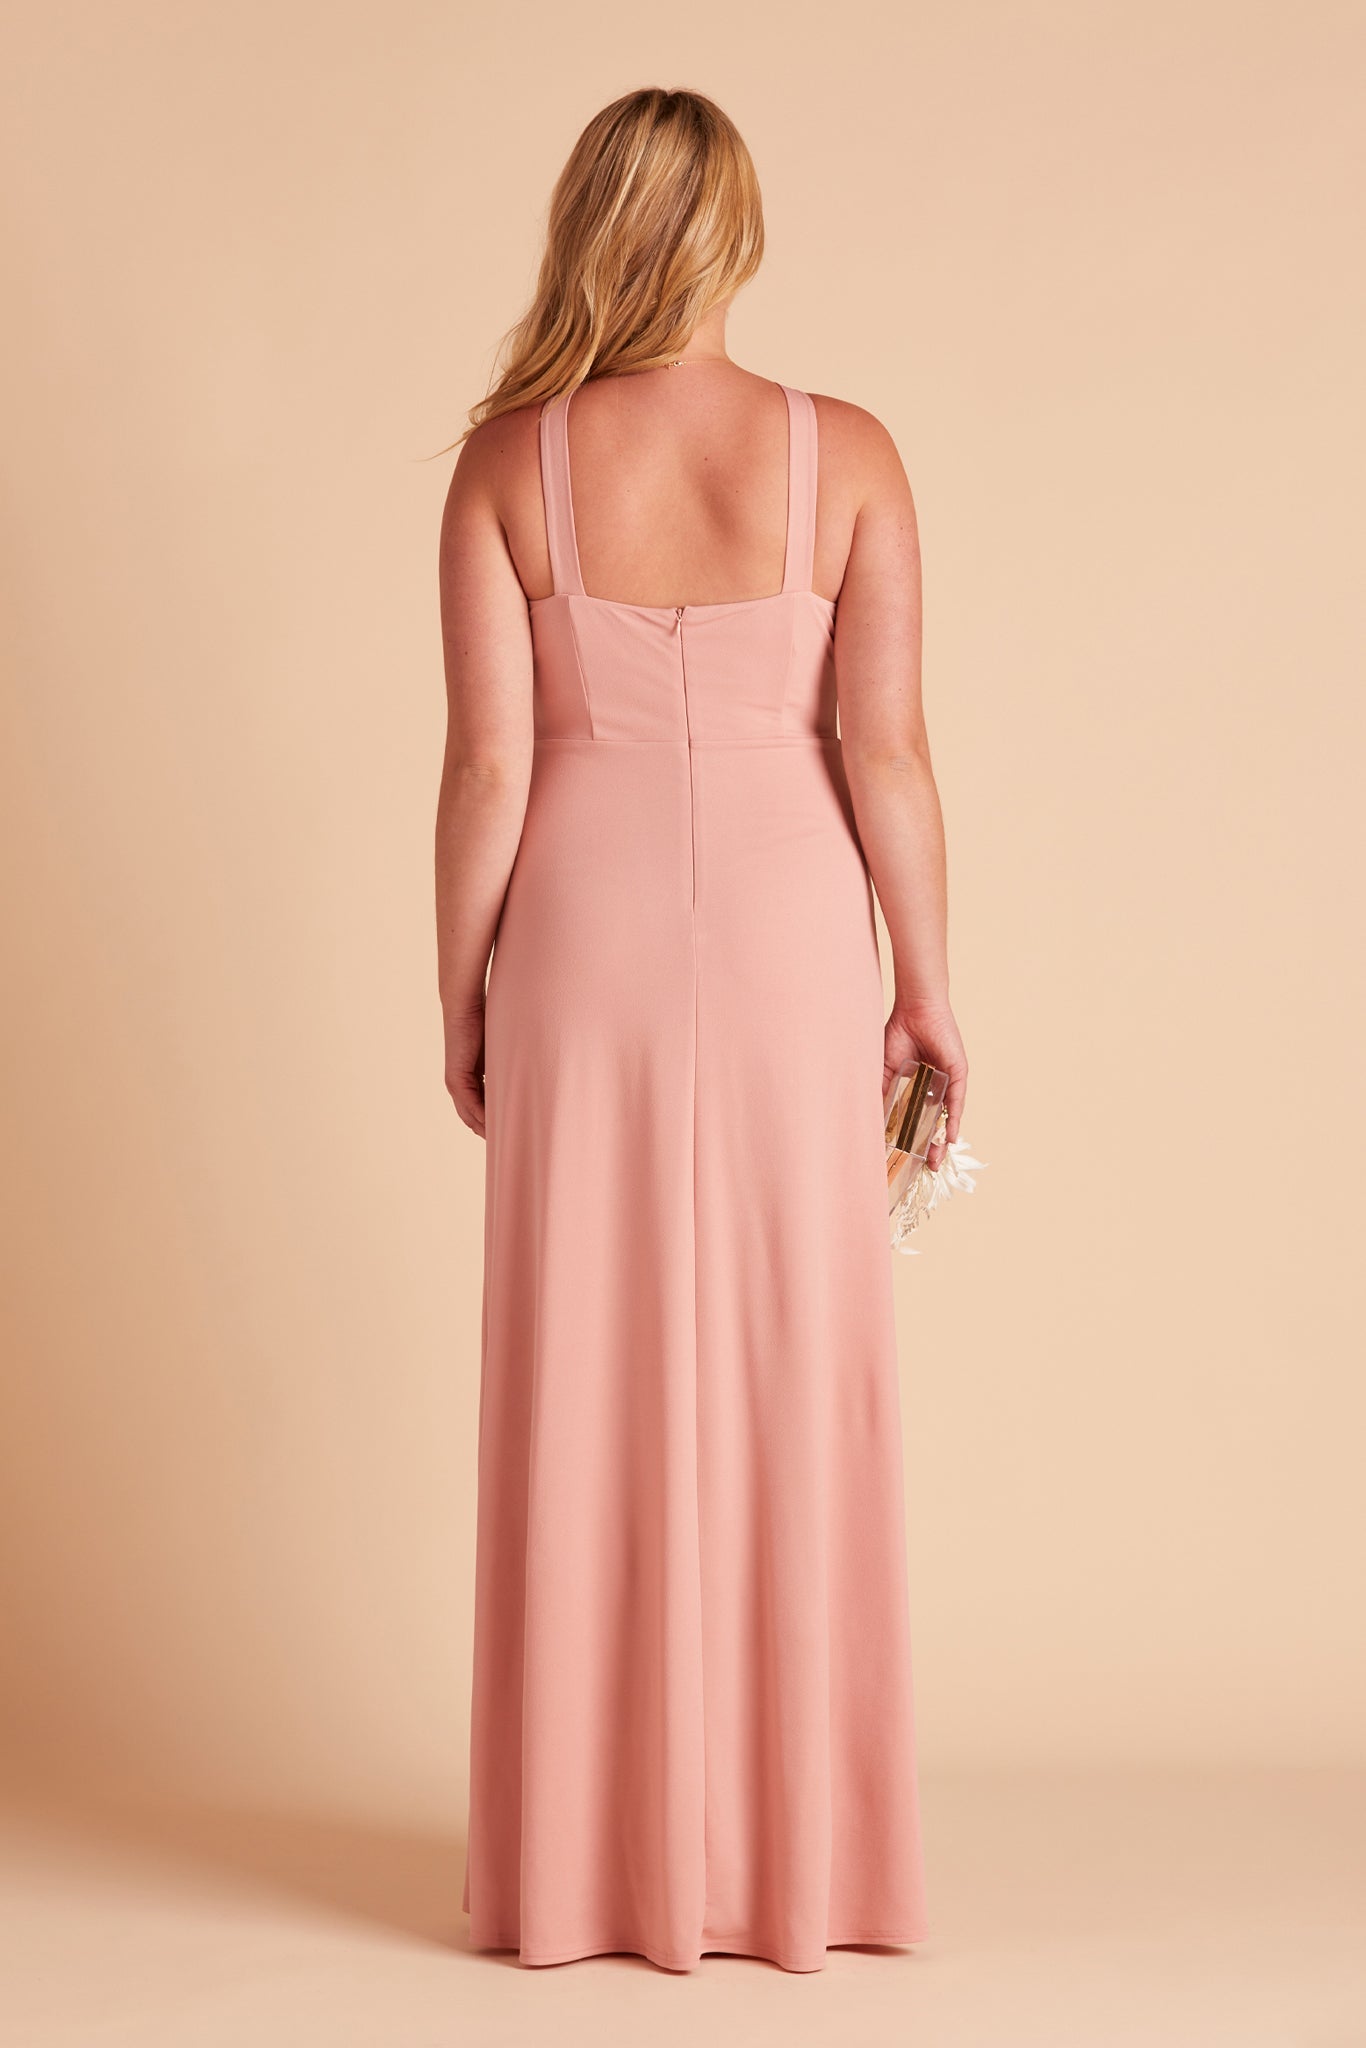 Gene plus size bridesmaid dress with slit in dusty rose crepe by Birdy Grey, back view